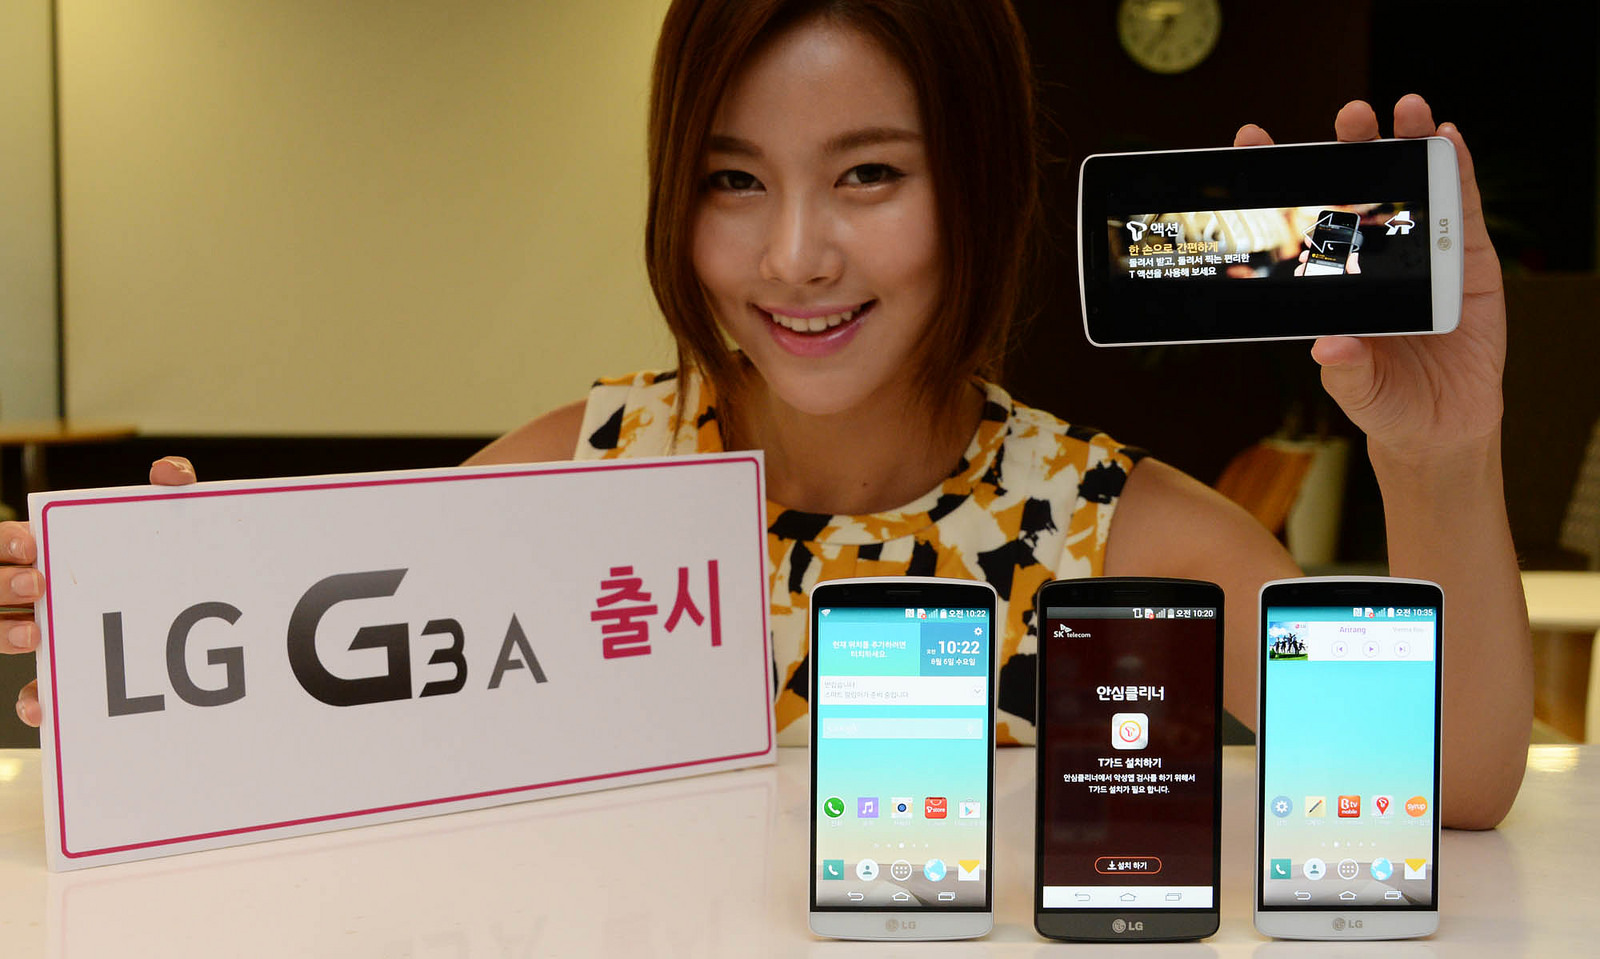 LG-G3-A-official-images